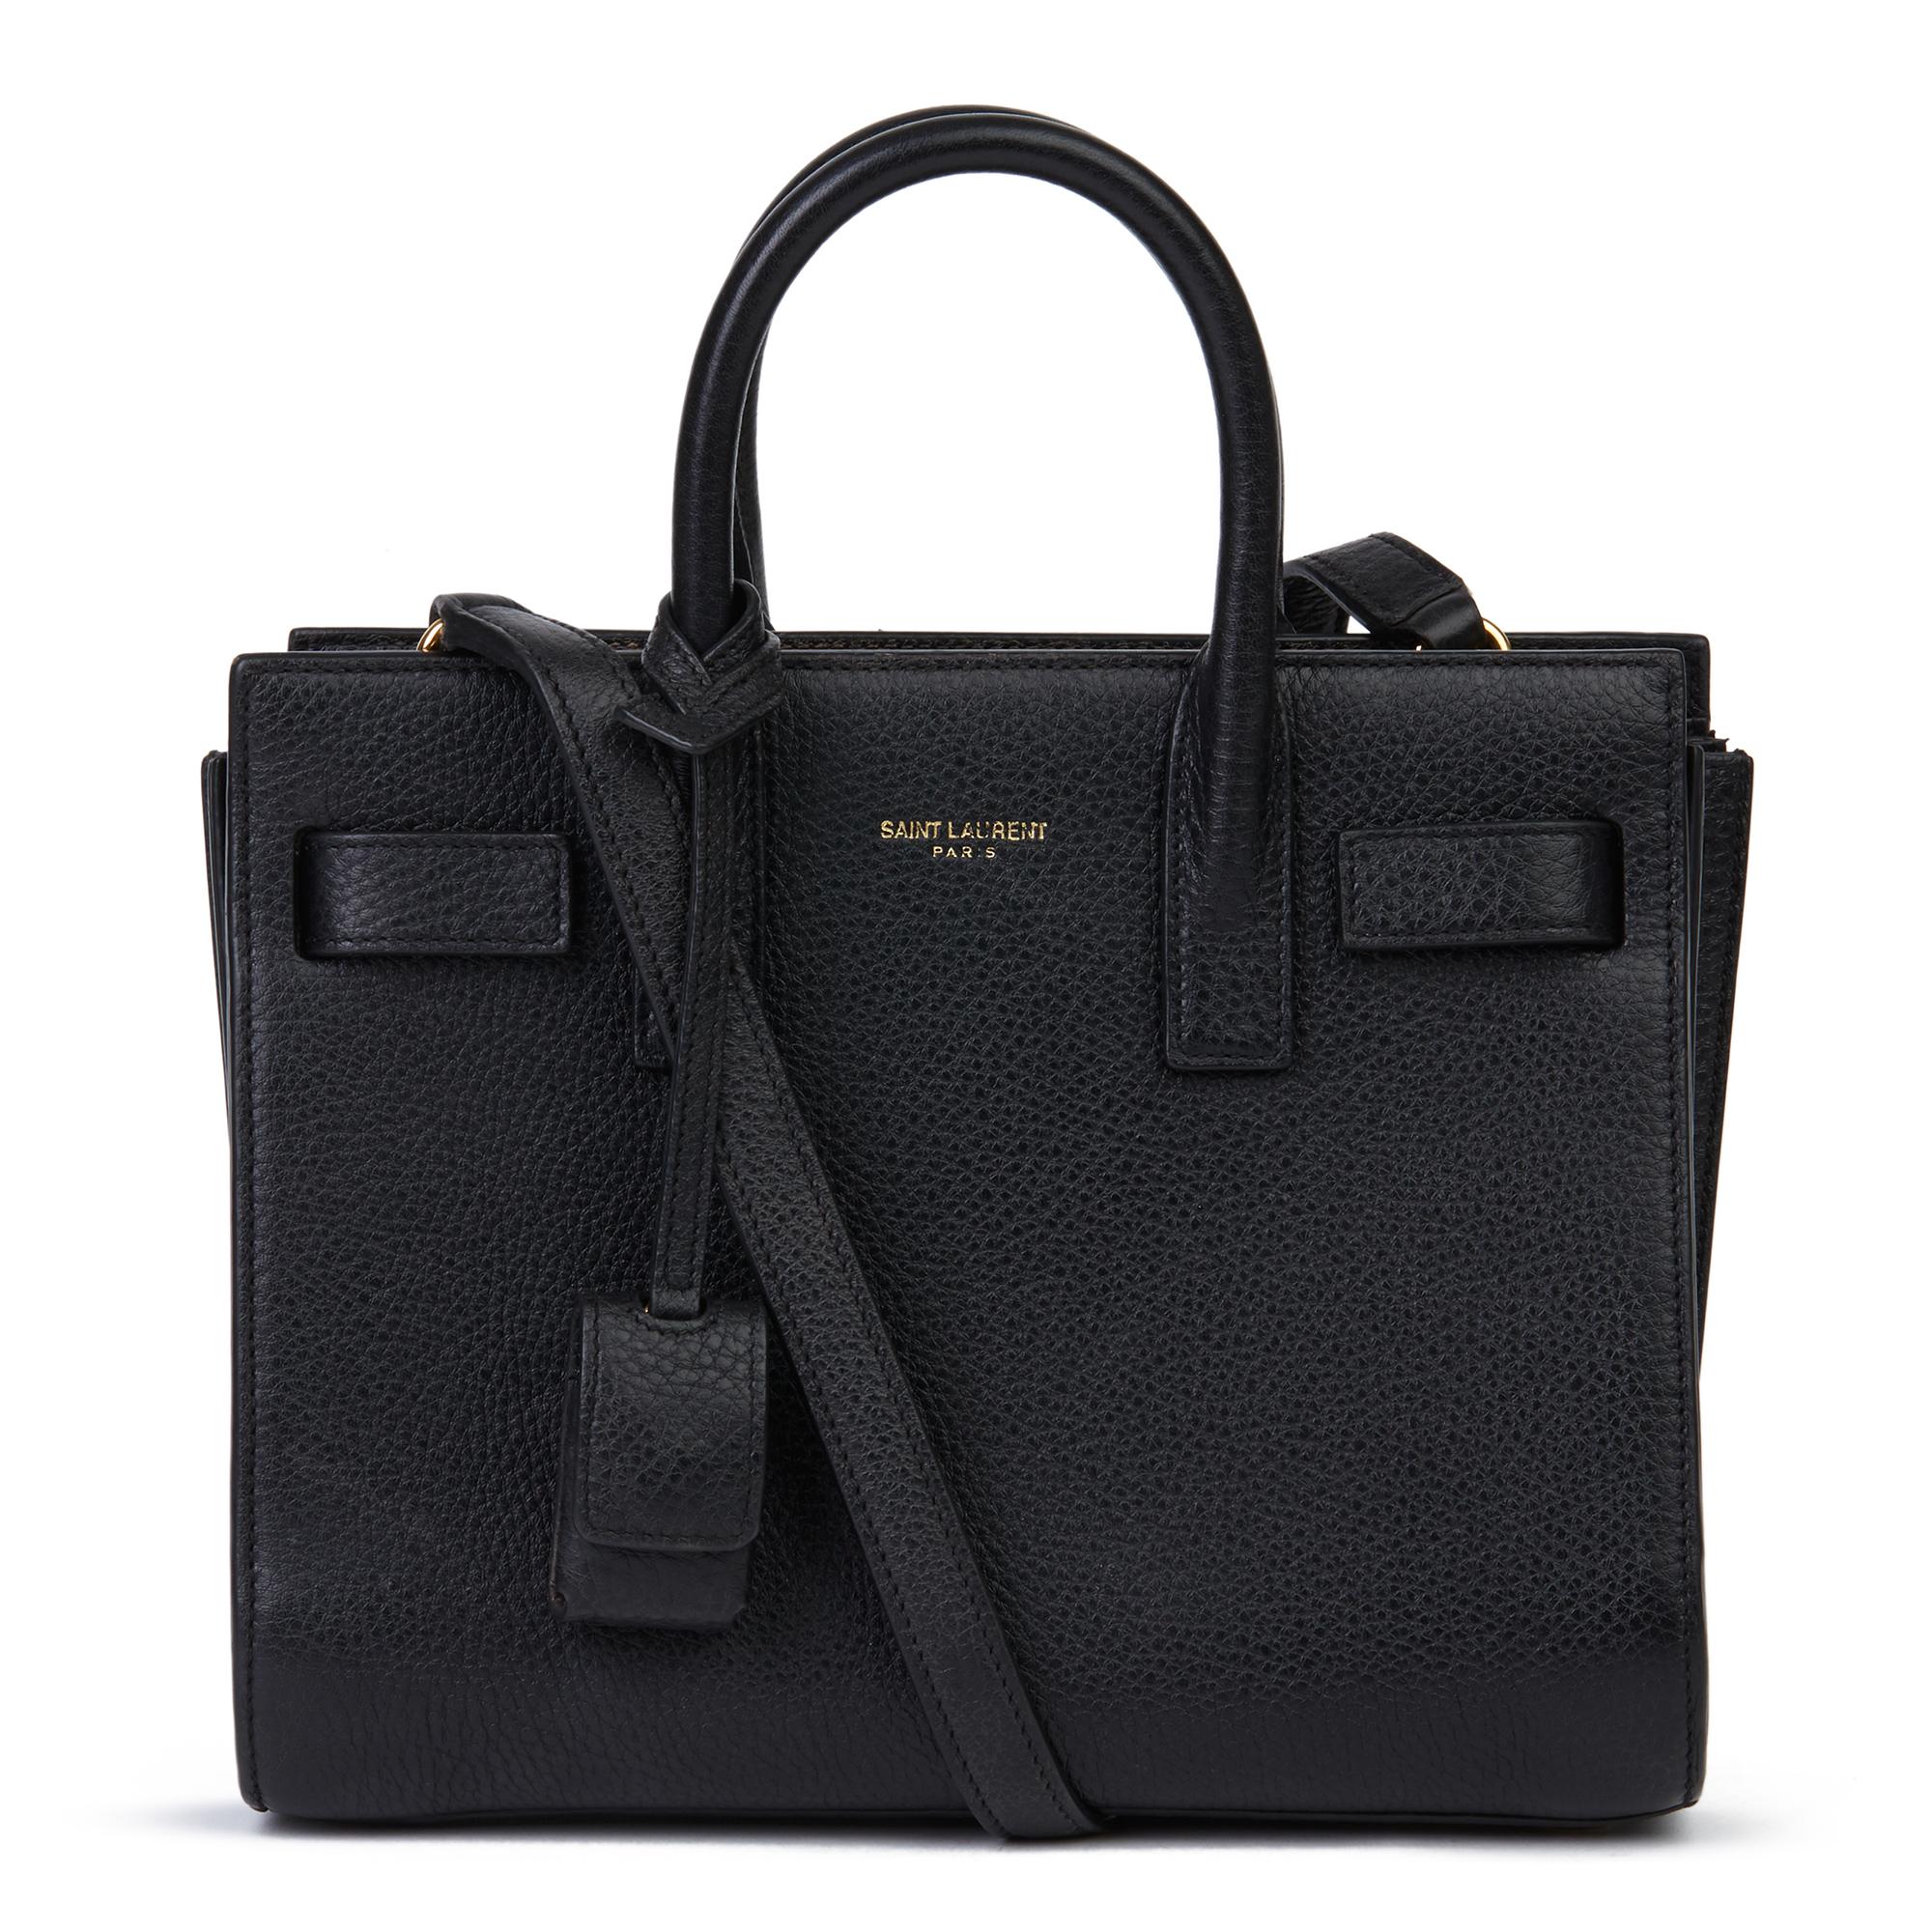 SAINT LAURENT
Black Grained Calfskin Leather Mini Sac de Jour

Xupes Reference: HB3503
Serial Number: PLB340778-0814
Age (Circa): 2014
Accompanied By: Saint Laurent Dust Bag, Shoulder Strap
Authenticity Details: Serial Stamp (Made in Italy)
Gender: